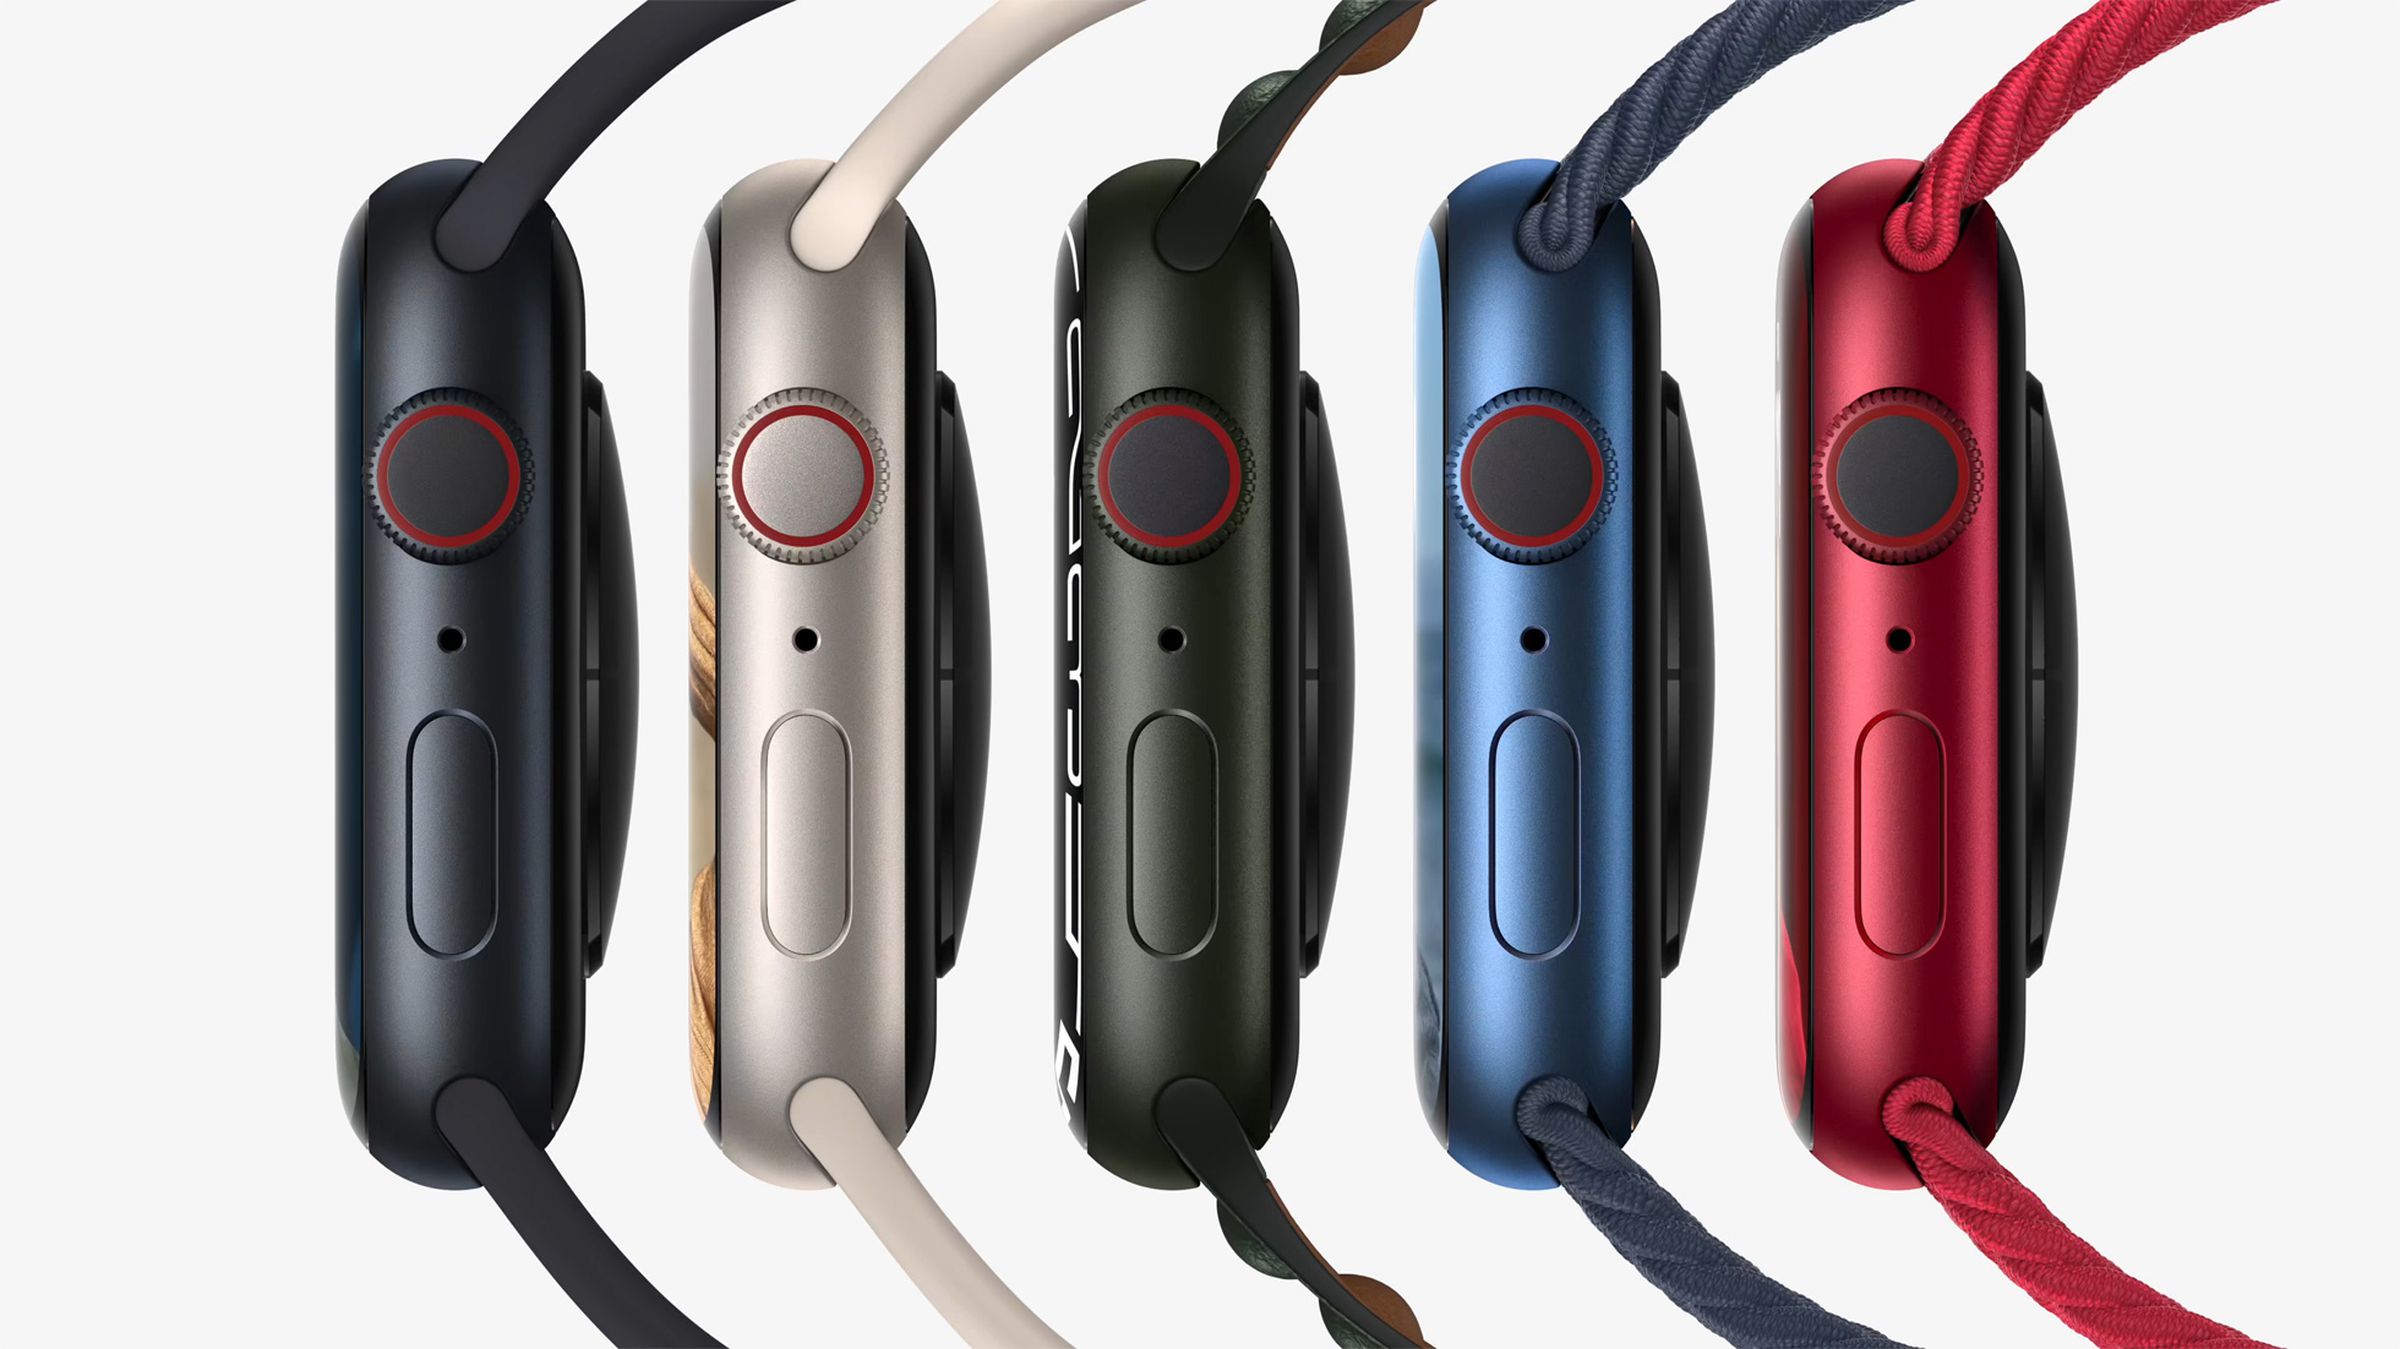 Apple Watch Series 7 in midnight, starlight, green, blue, and PRODUCT (RED).